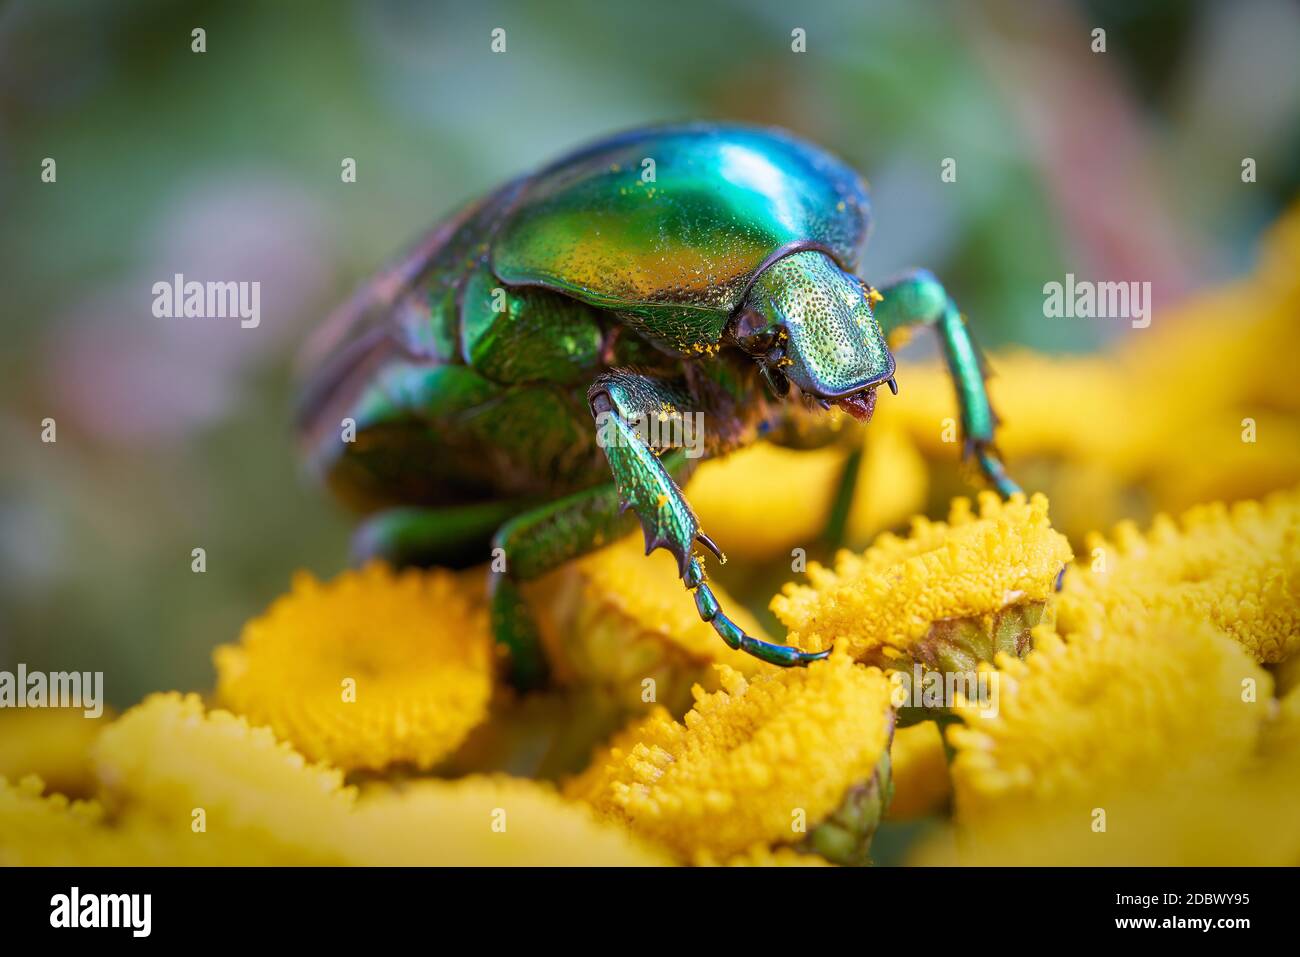 Rose beetle (Cetonia aurata) on a yellow flower in the garden Stock Photo